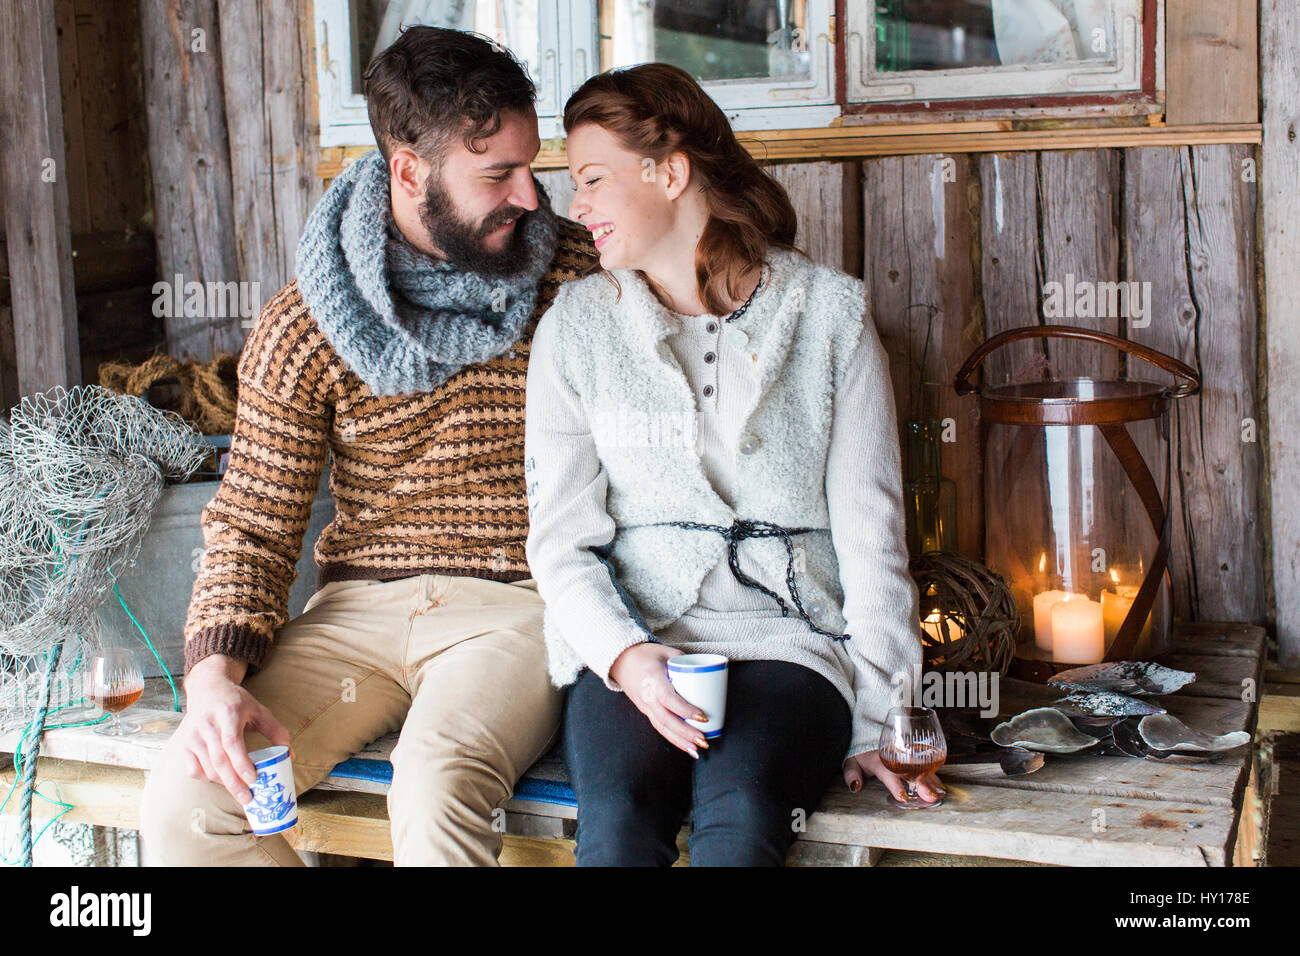 Sweden, Young couple sitting on wooden table and talking Stock Photo